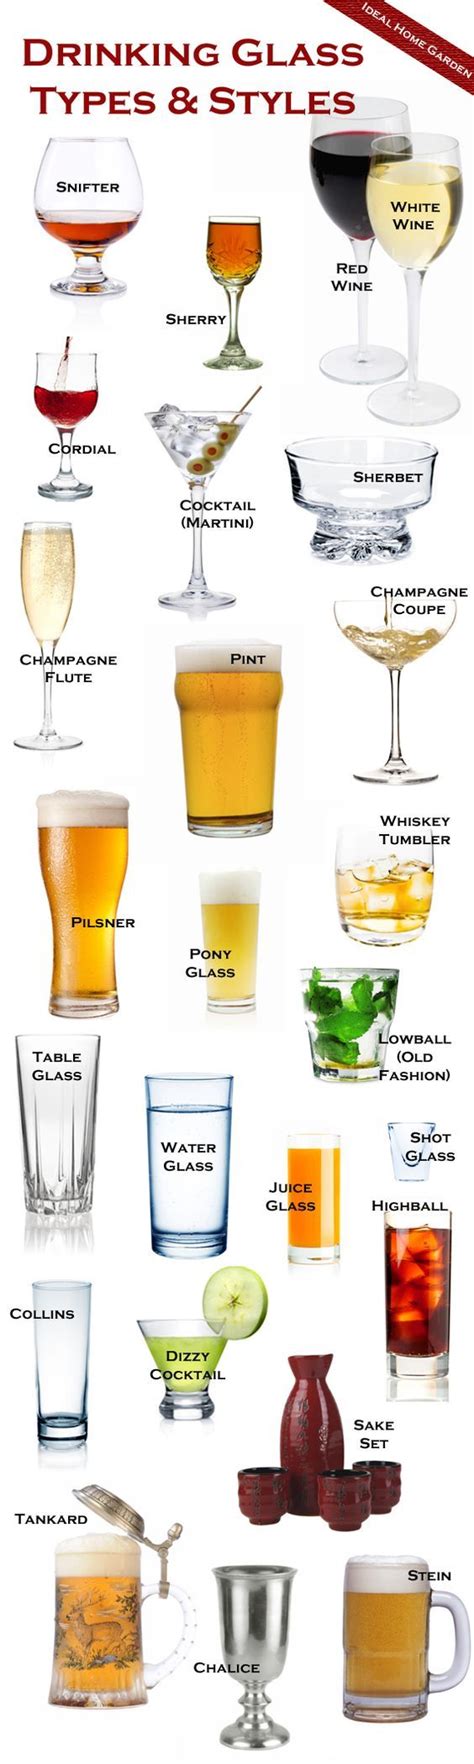 Types Of Drinking Glasses And Their Uses Ideal Home Garden Dezdemon Home Decor Ideas Space